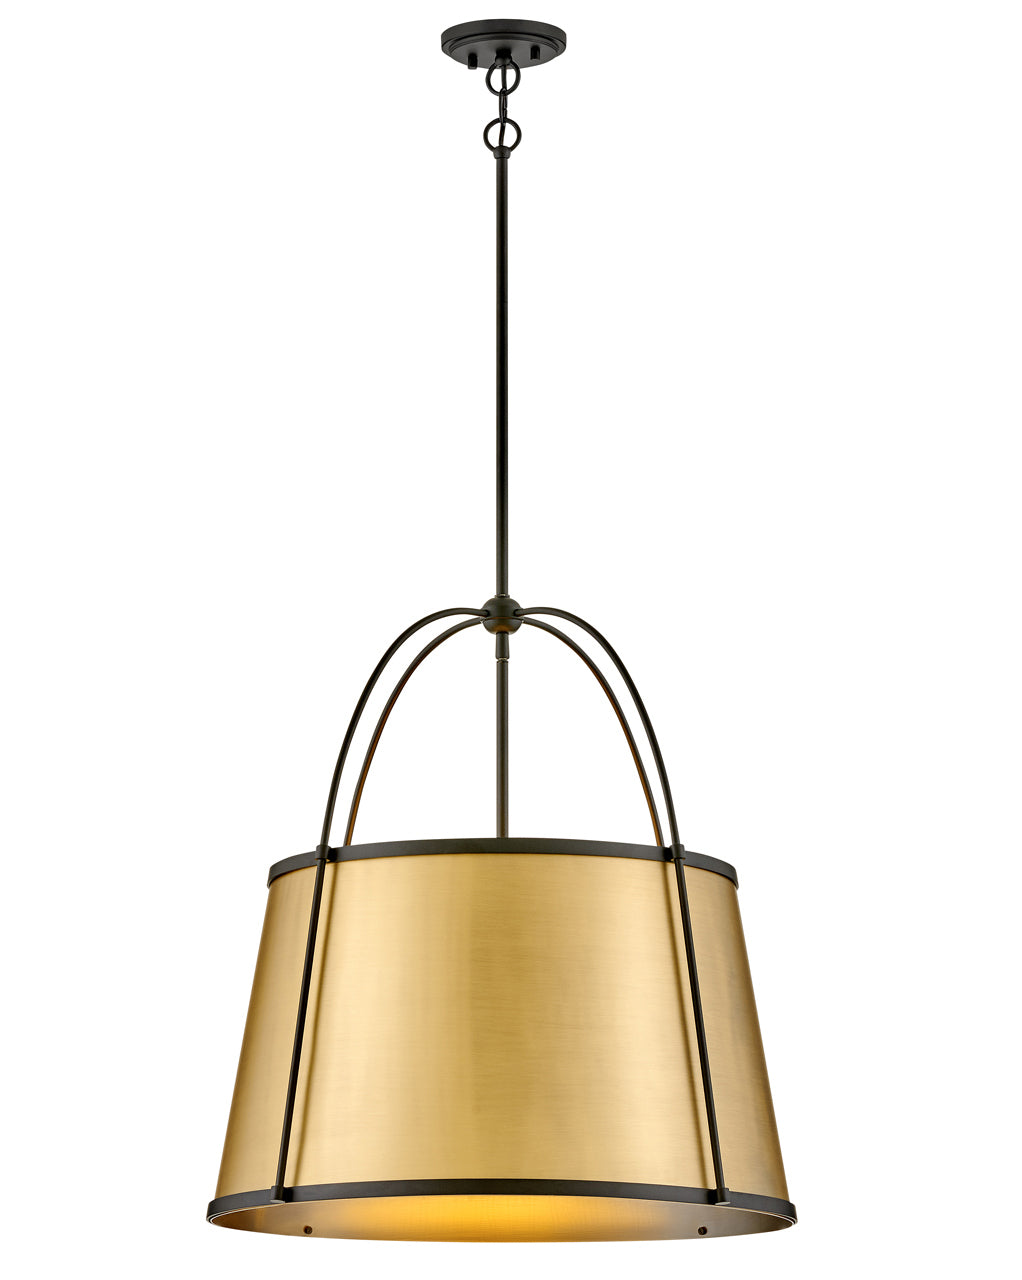 Hinkley Clarke Chandelier Chandeliers Hinkley Black with Lacquered Dark Brass accents 24.5x24.5x24.5 